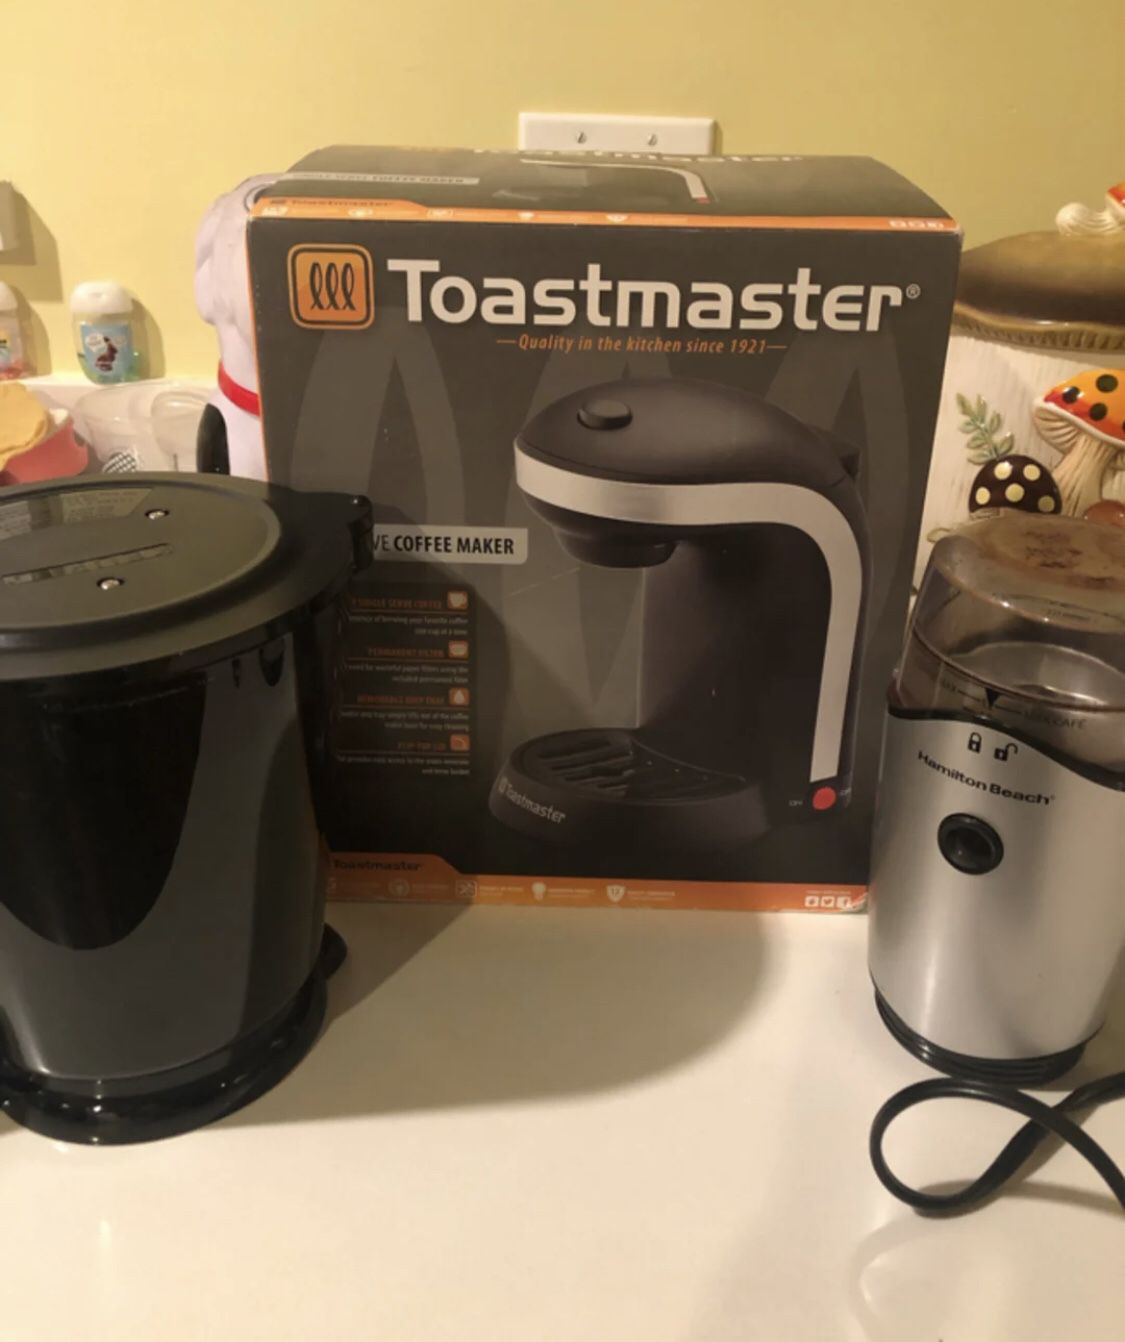 Toastmaster single coffee maker n more All for $10.00